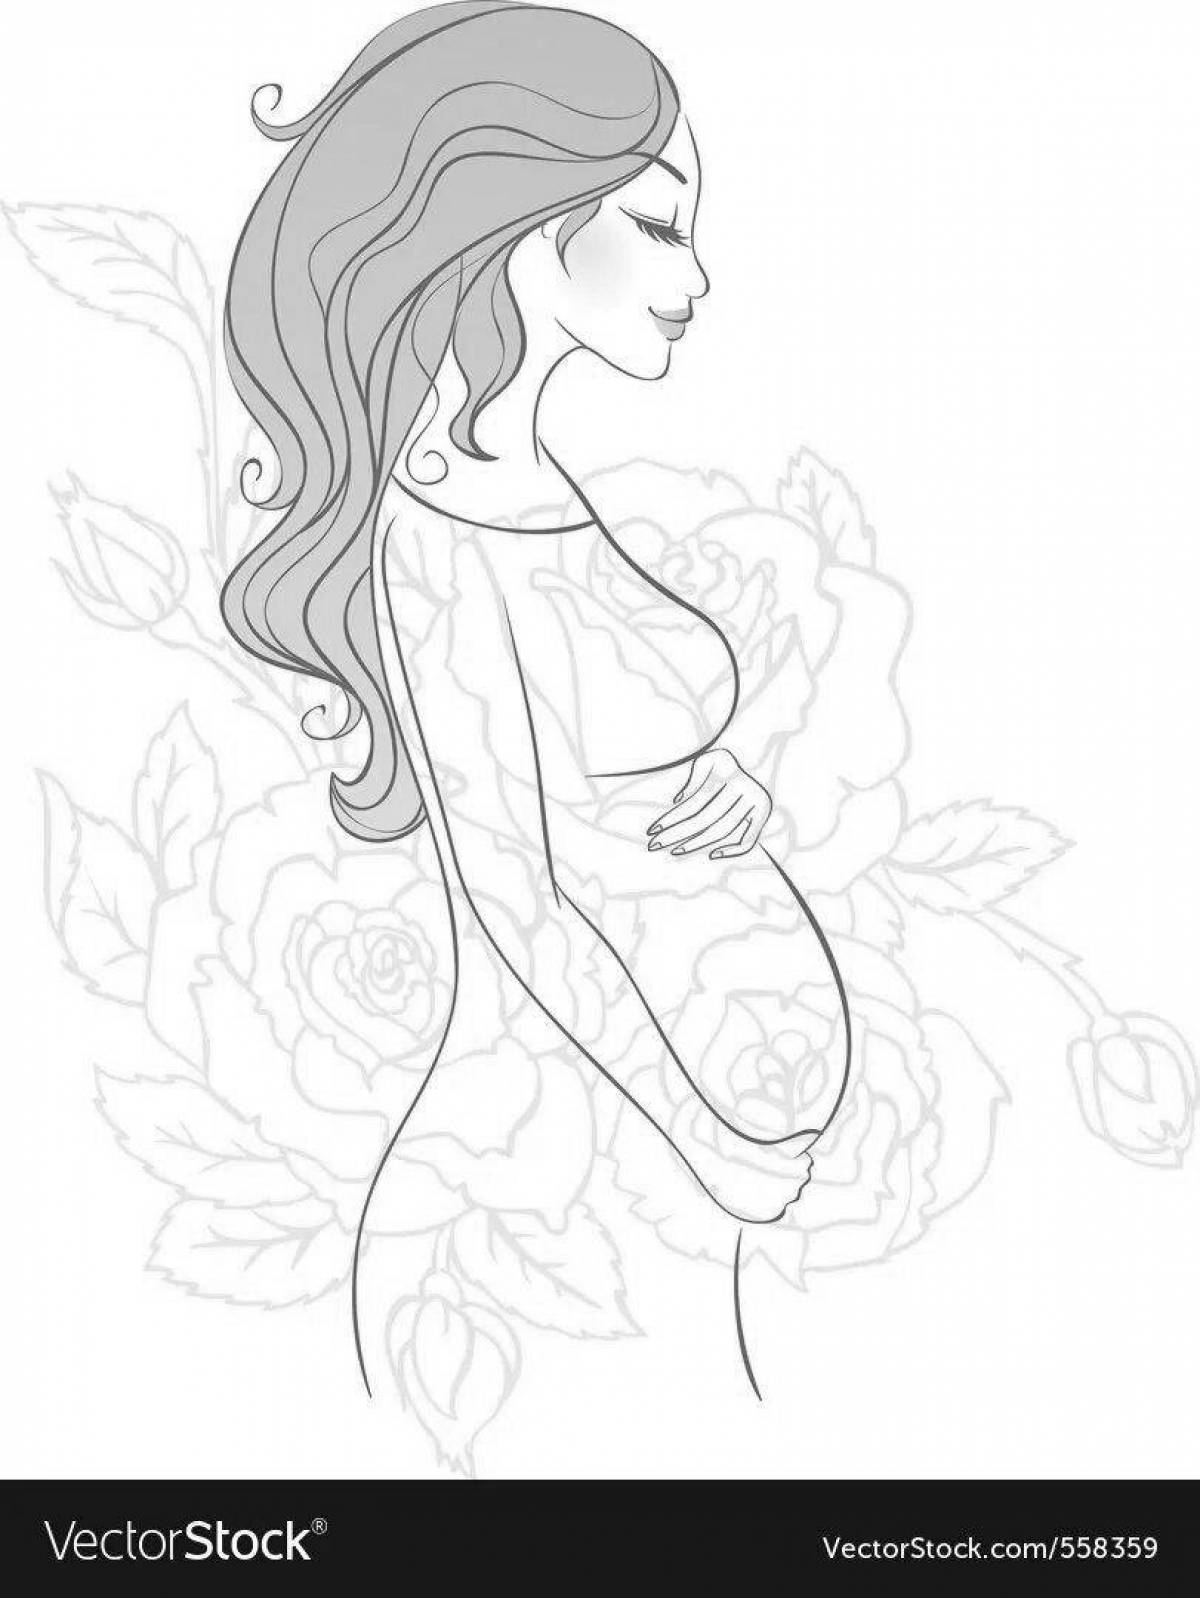 Coloring book glowing moms-to-be